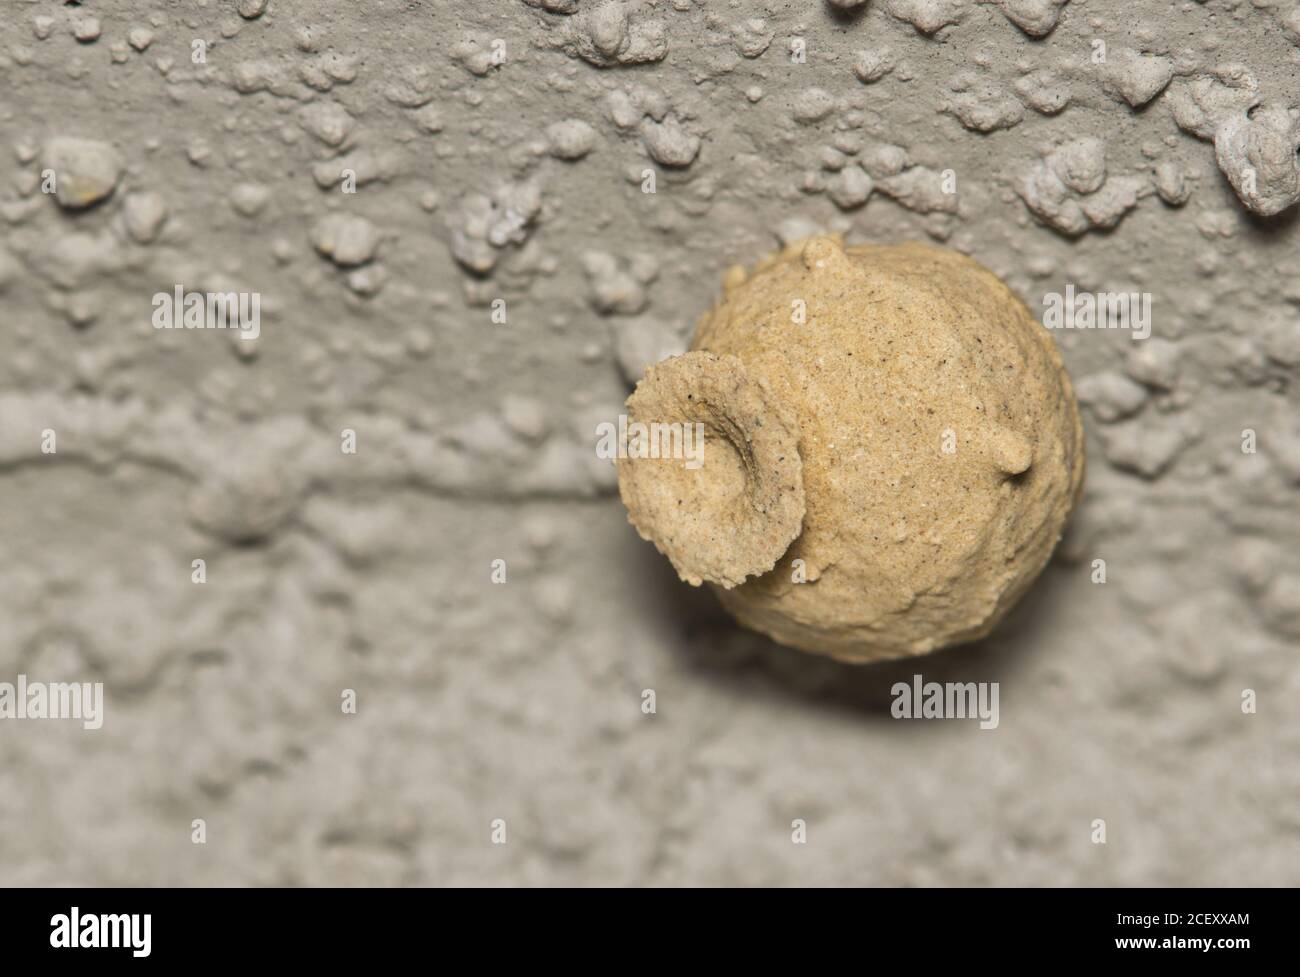 Potter wasp nest made of mud attached to a wall exterior. Also called Mason wasps. Macro image with copy space. Stock Photo